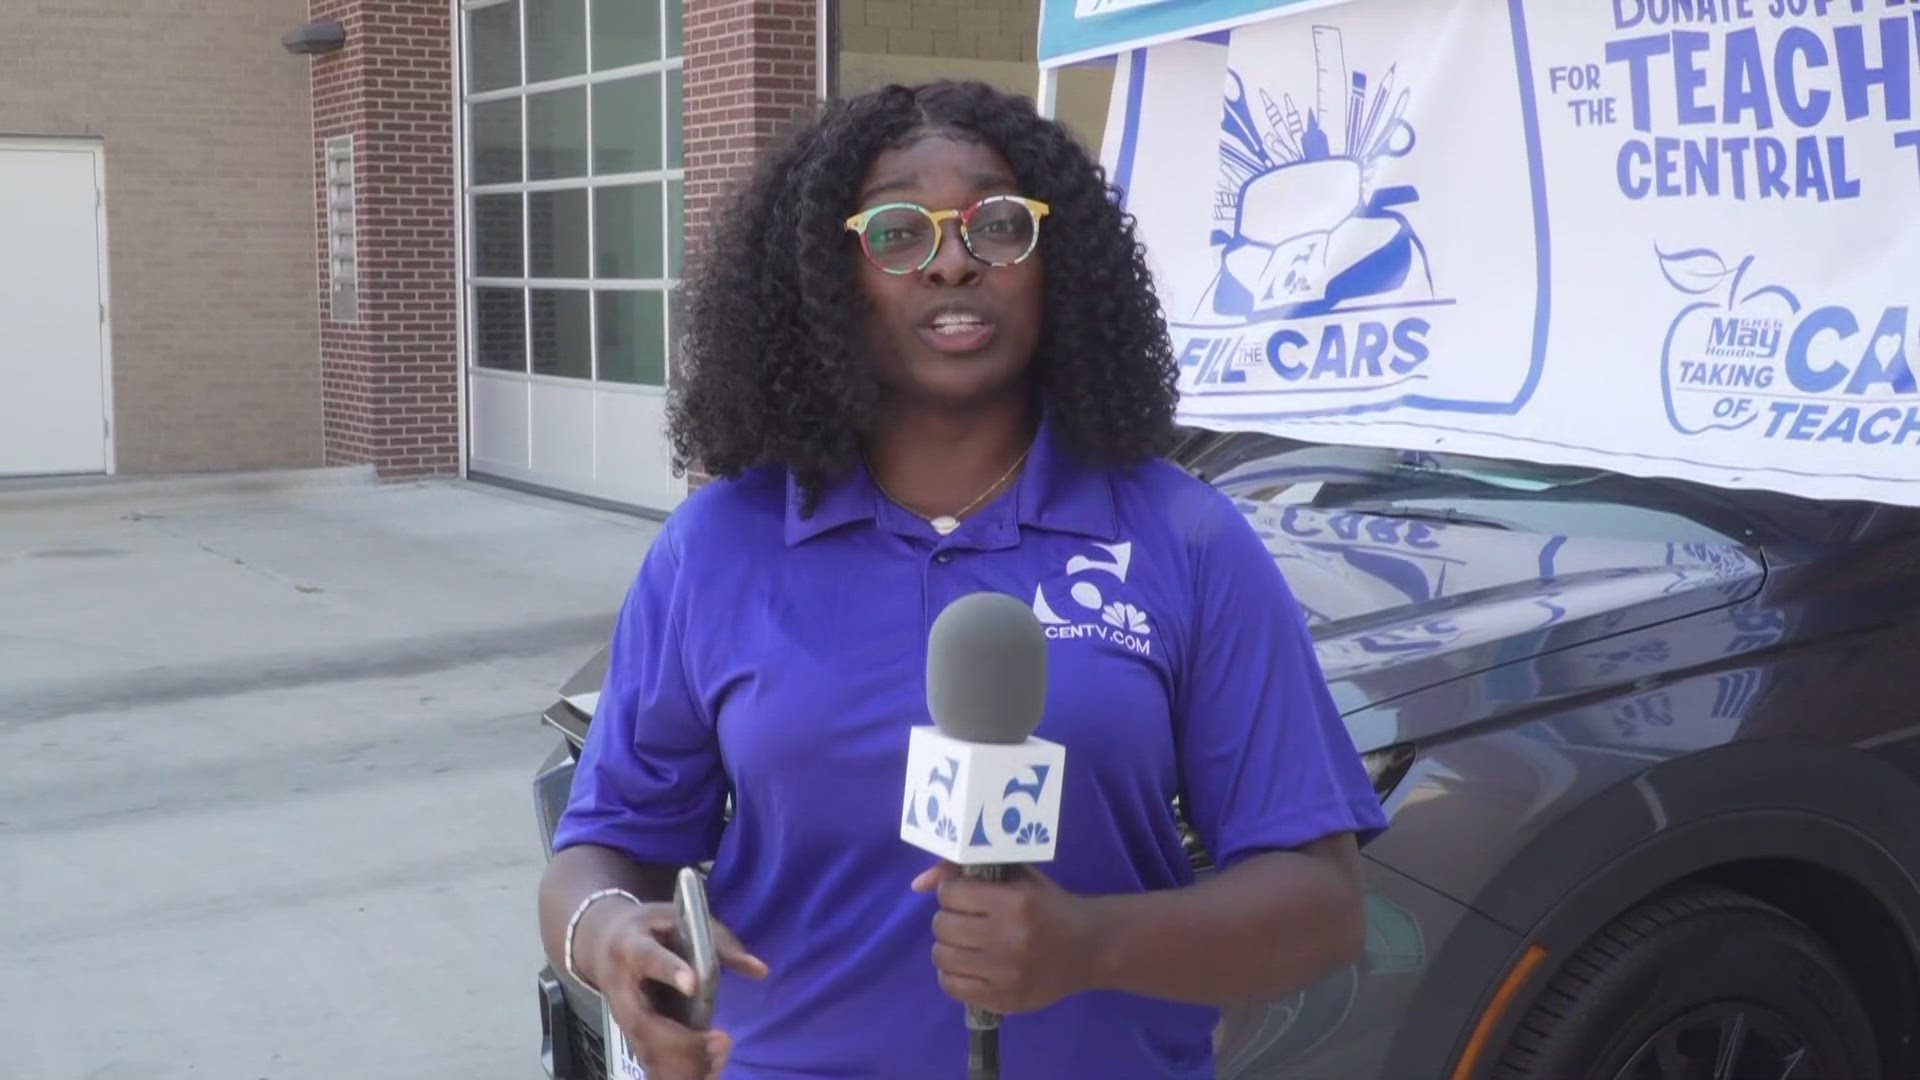 Adriana Alexander goes live at the Temple Central Fire Station for the Taking Care of Teachers Supply Drive!